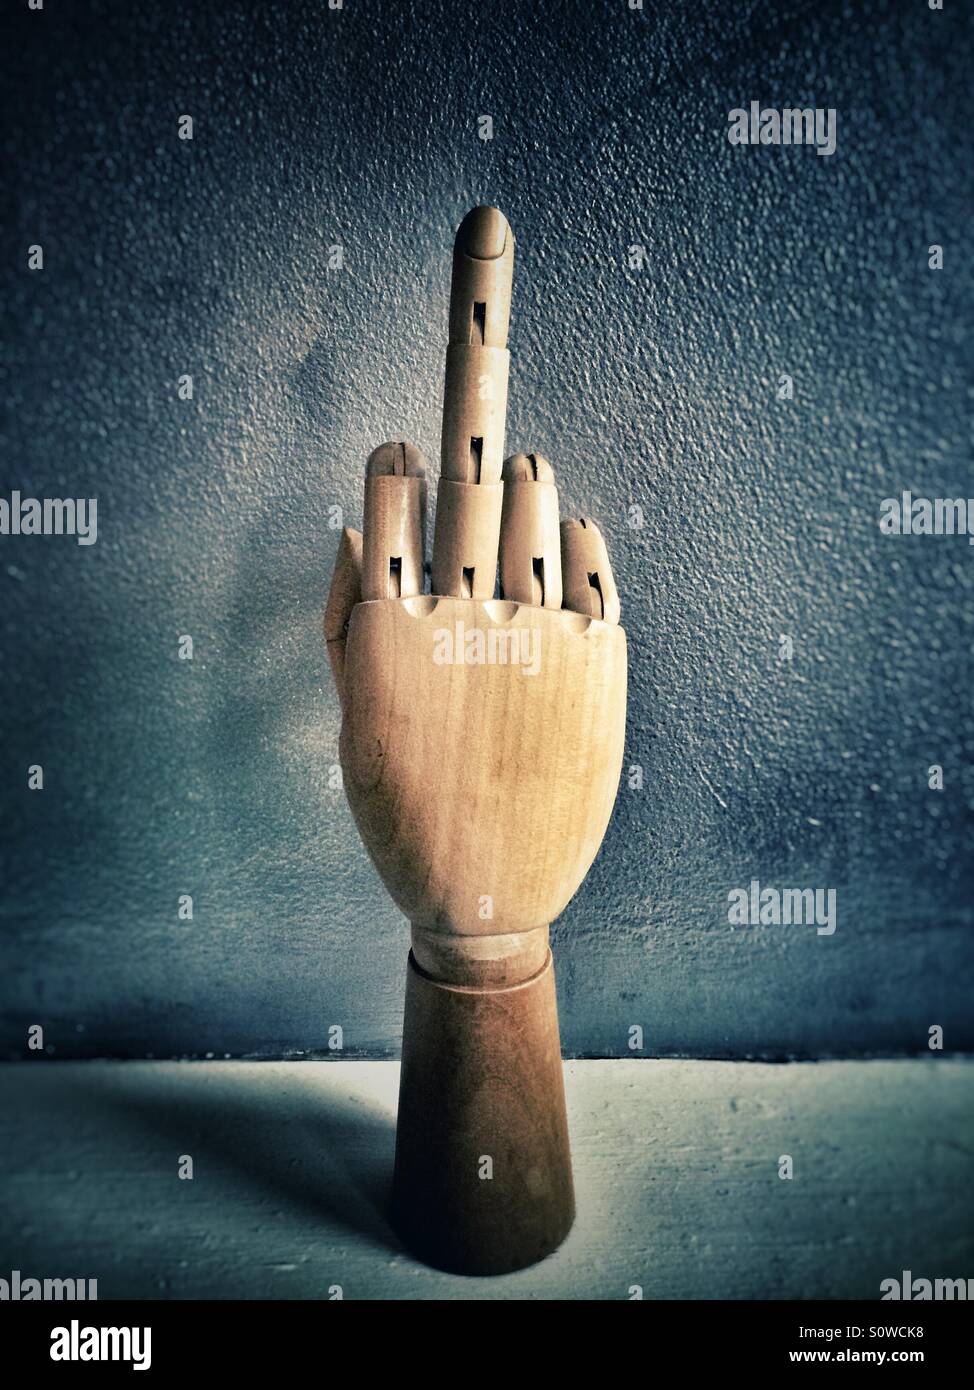 Wooden mannequin hand giving the finger Stock Photo